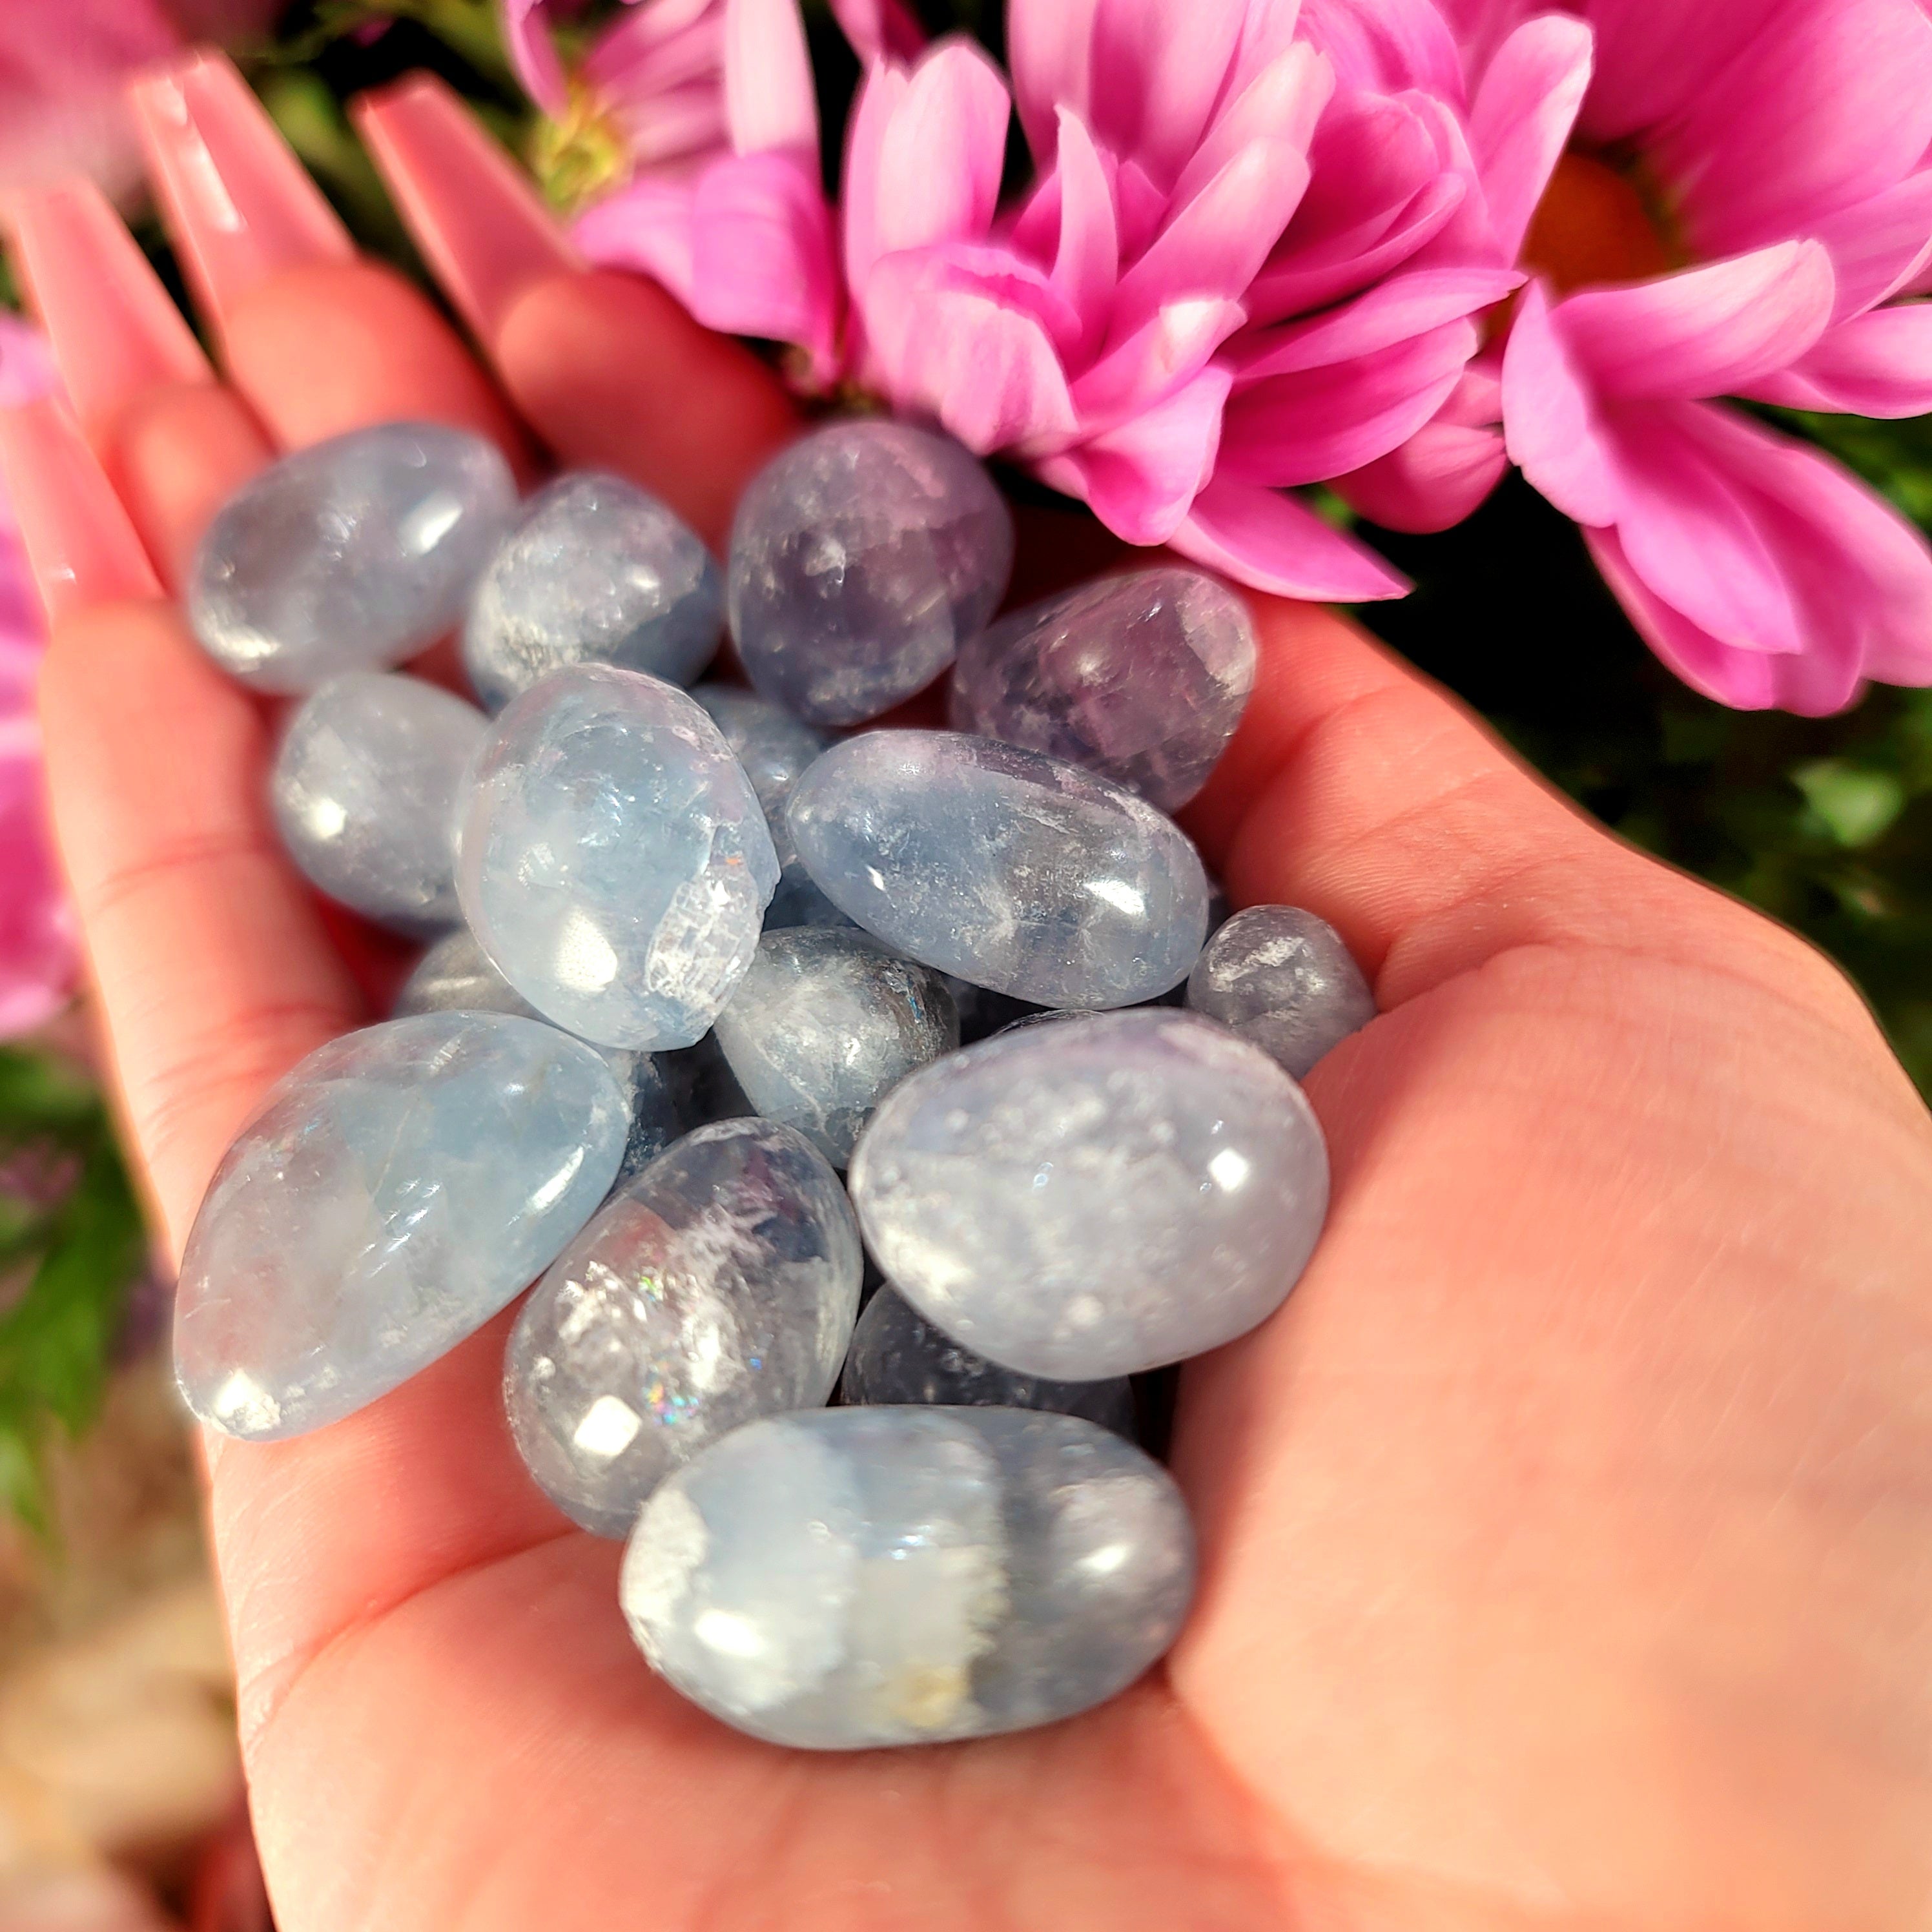 Celestite Tumble for Communicating with Angels, Spirit Guides and Higher Realms